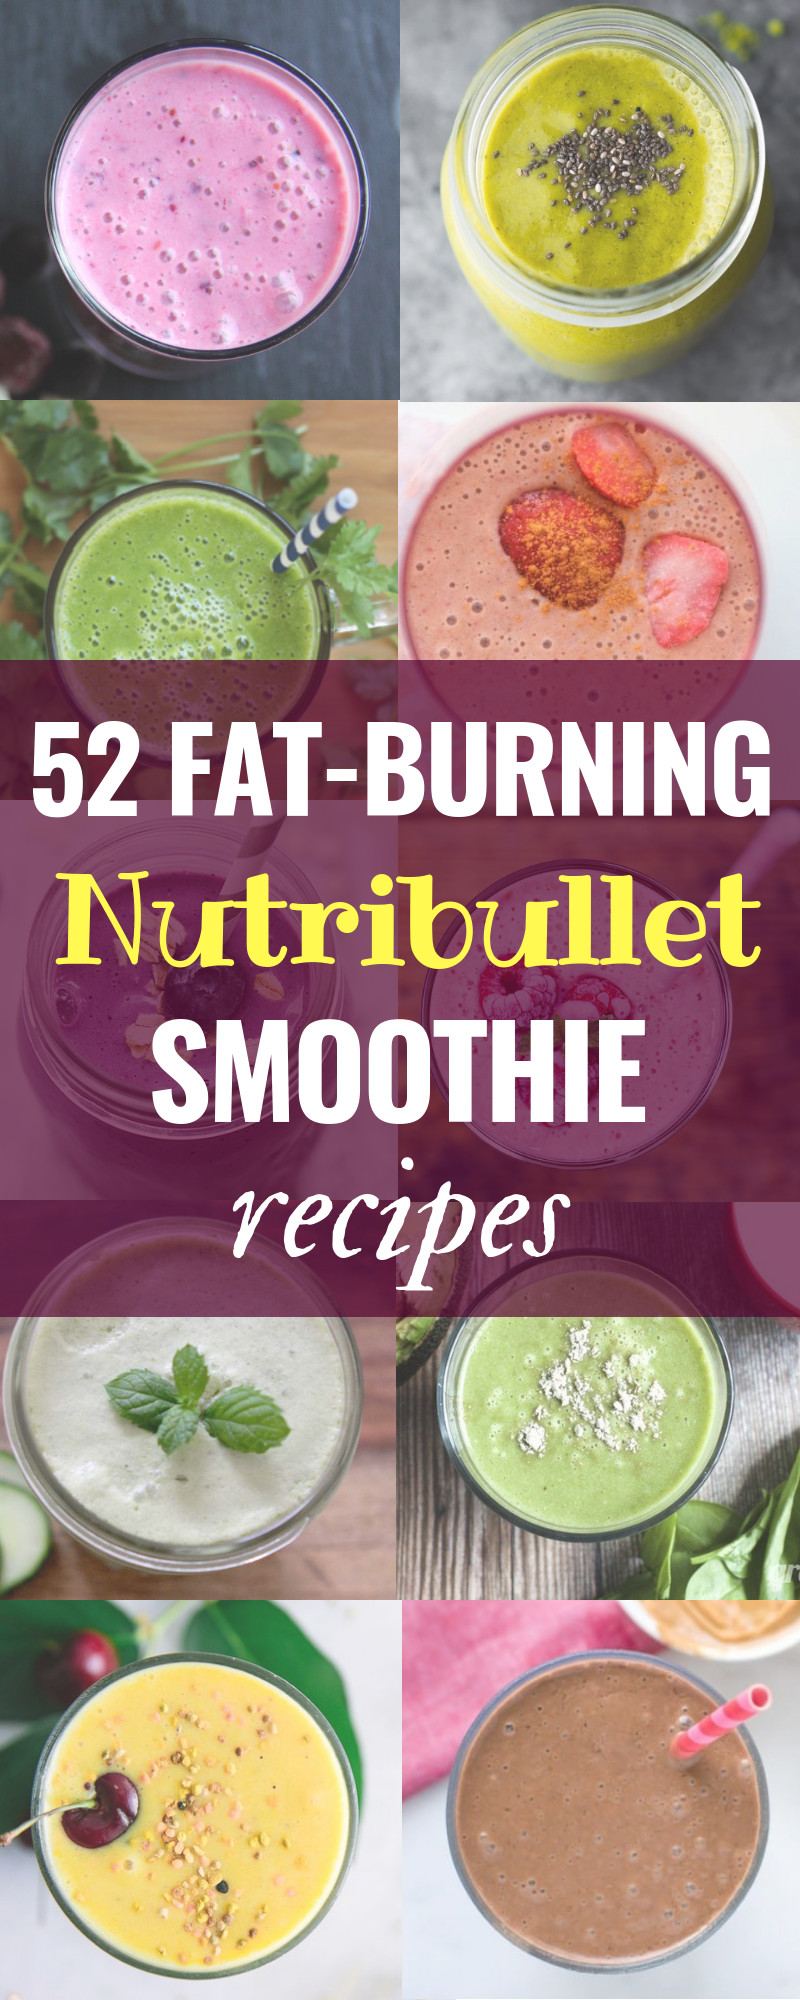 Nutribullet Recipes For Weight Loss
 Put your new Nutribullet to good use with these 52